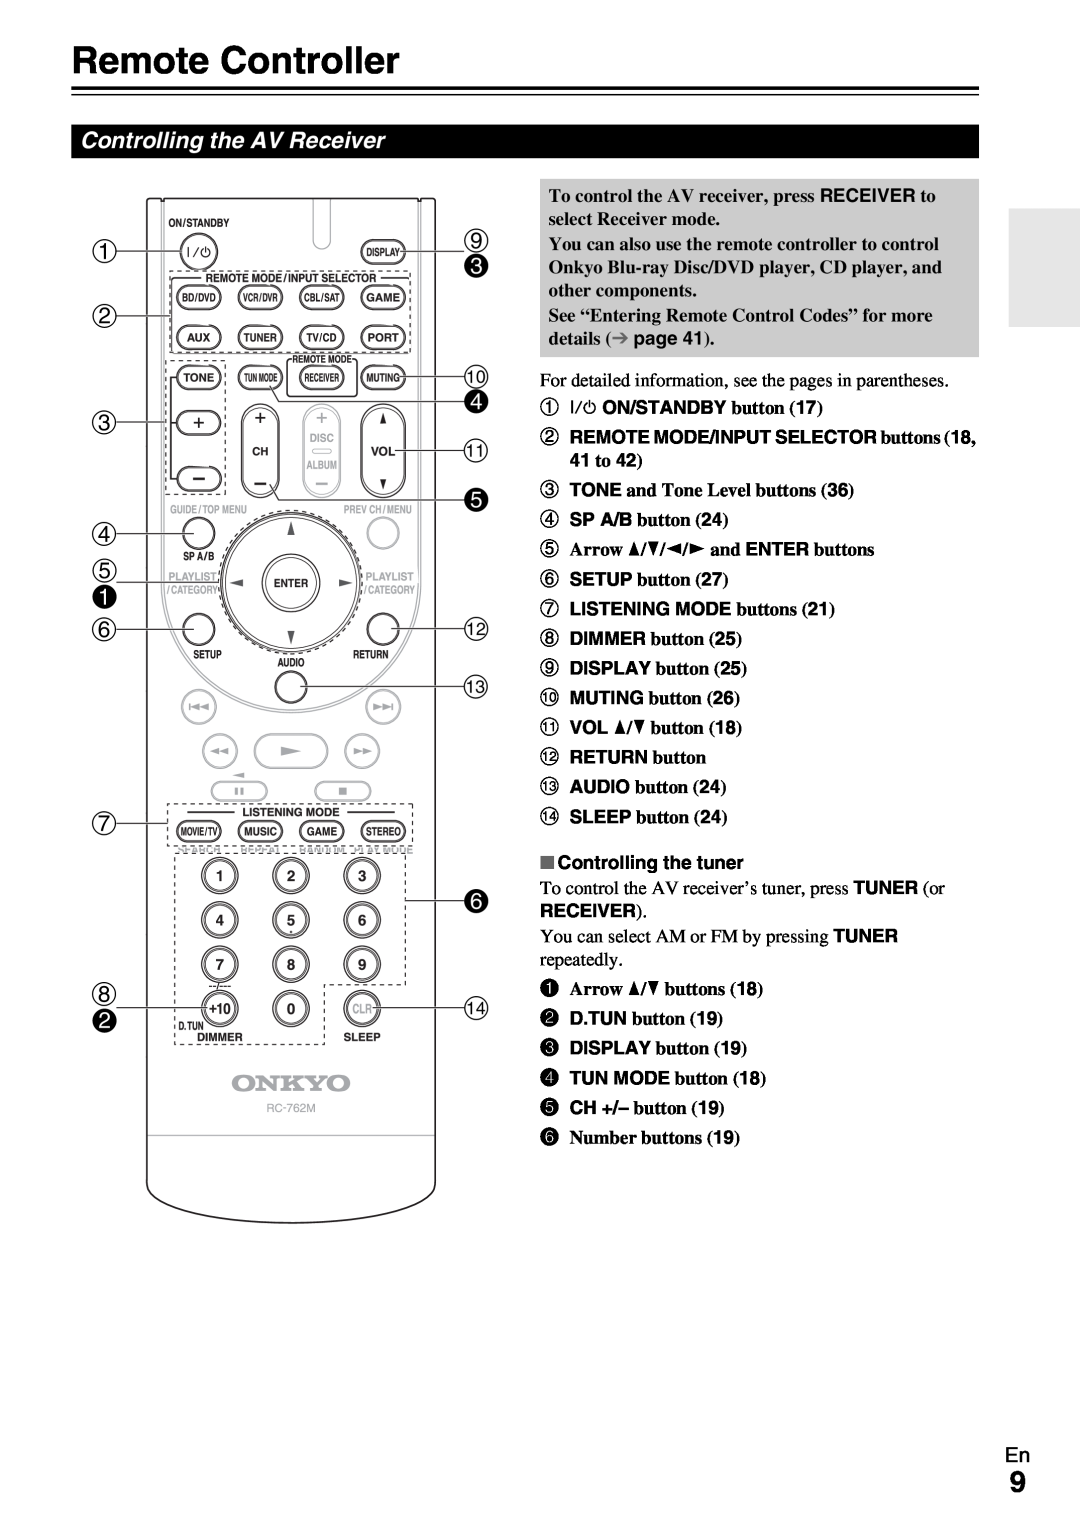 Onkyo HT-R390 instruction manual Remote Controller 